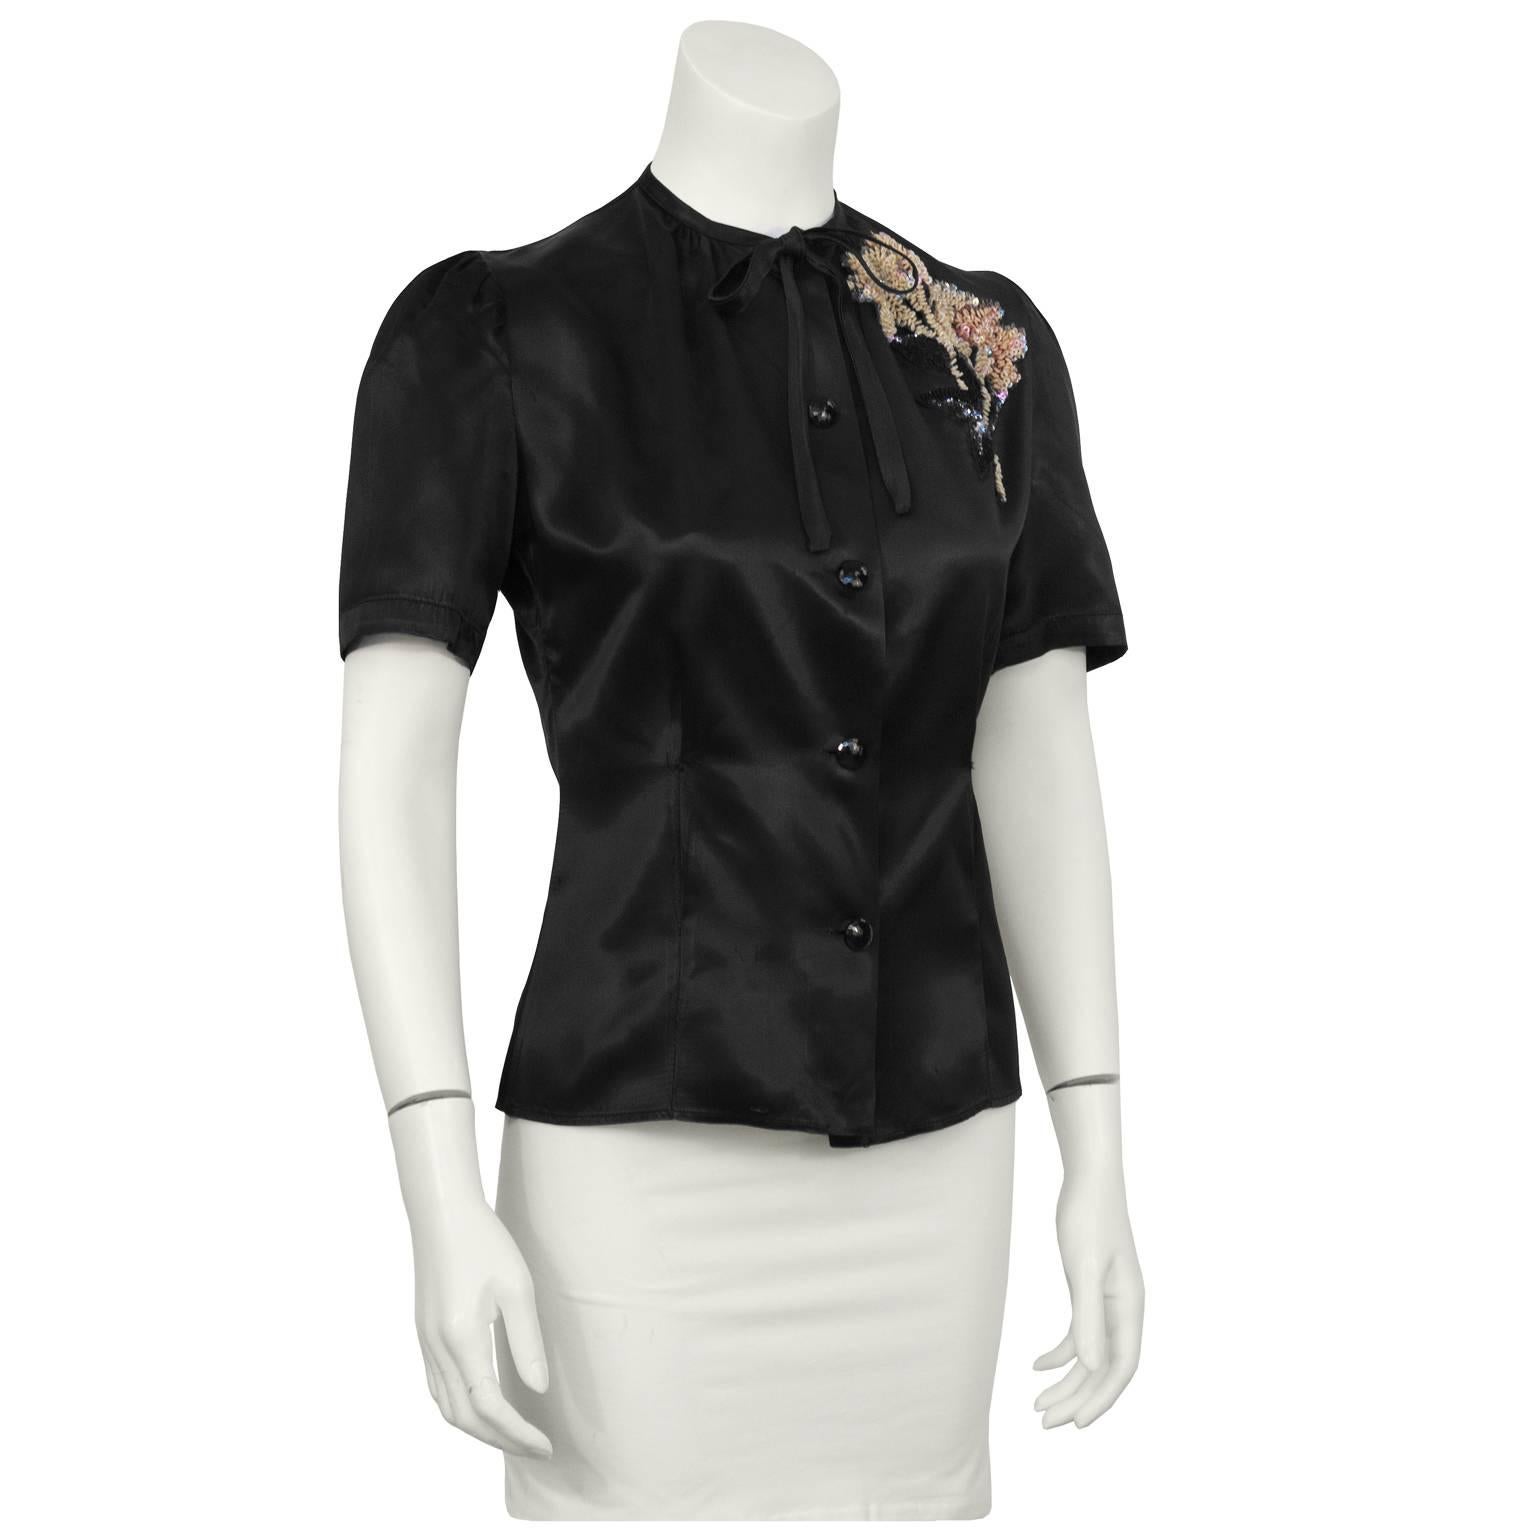 The best 1940's satin black fitted blouse with hand sewn sequin bouquet appliqué. The blouse features a skinny self tie bow and jet black faceted buttons down the front with a feminine puff sleeve. Fitted through the waist. In excellent condition.